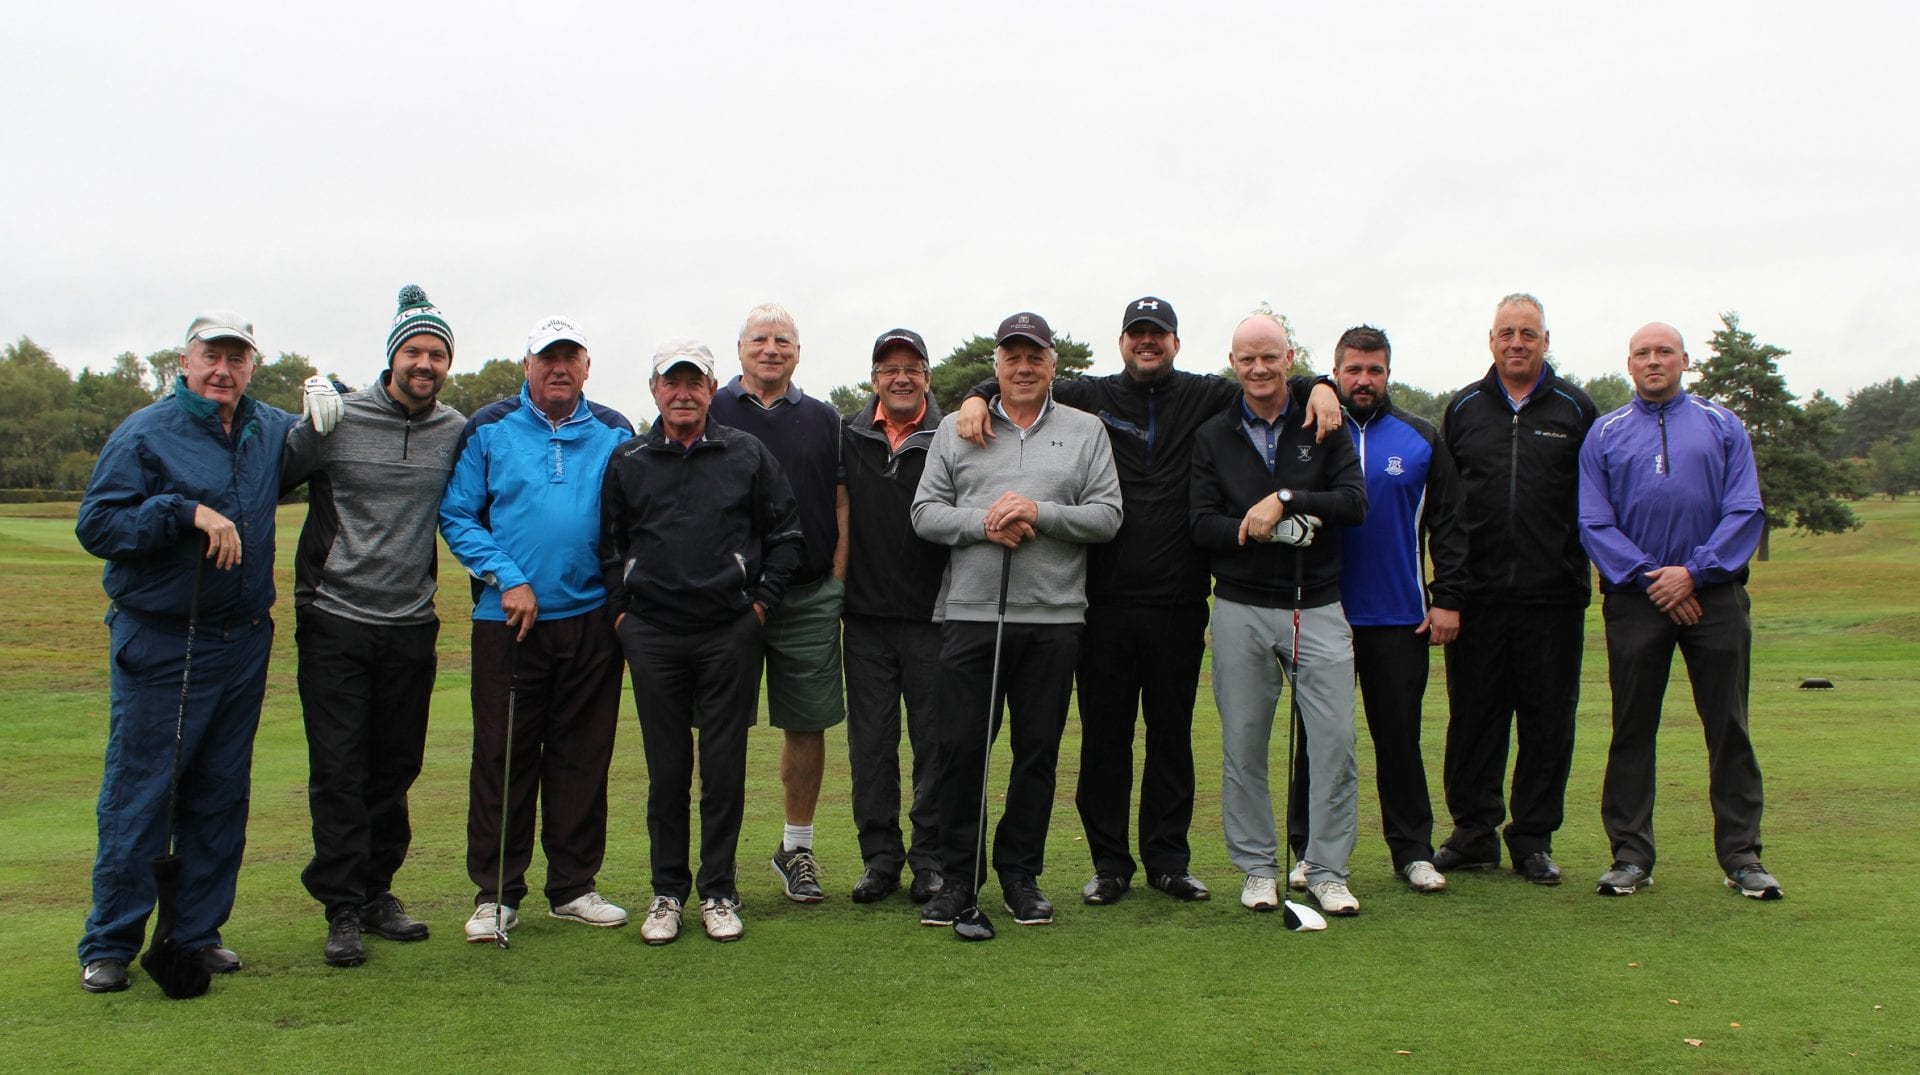 Golfers group at Stockport Golf Day